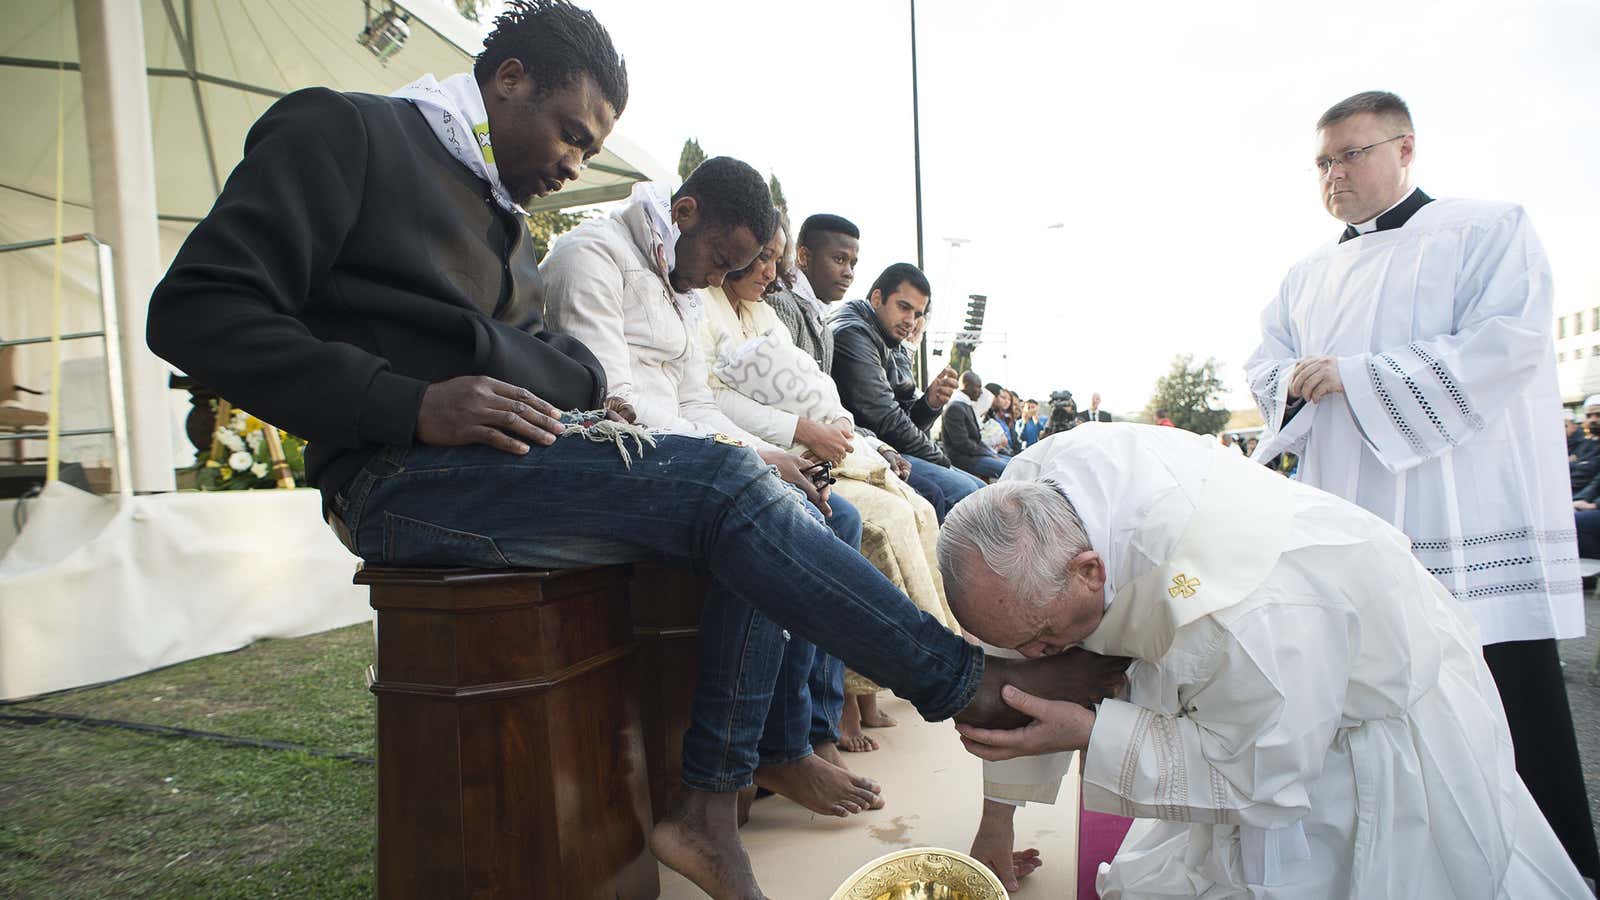 Pope Francis kisses the foot of a man during the foot-washing ritual at the Castelnuovo di Porto refugees center.